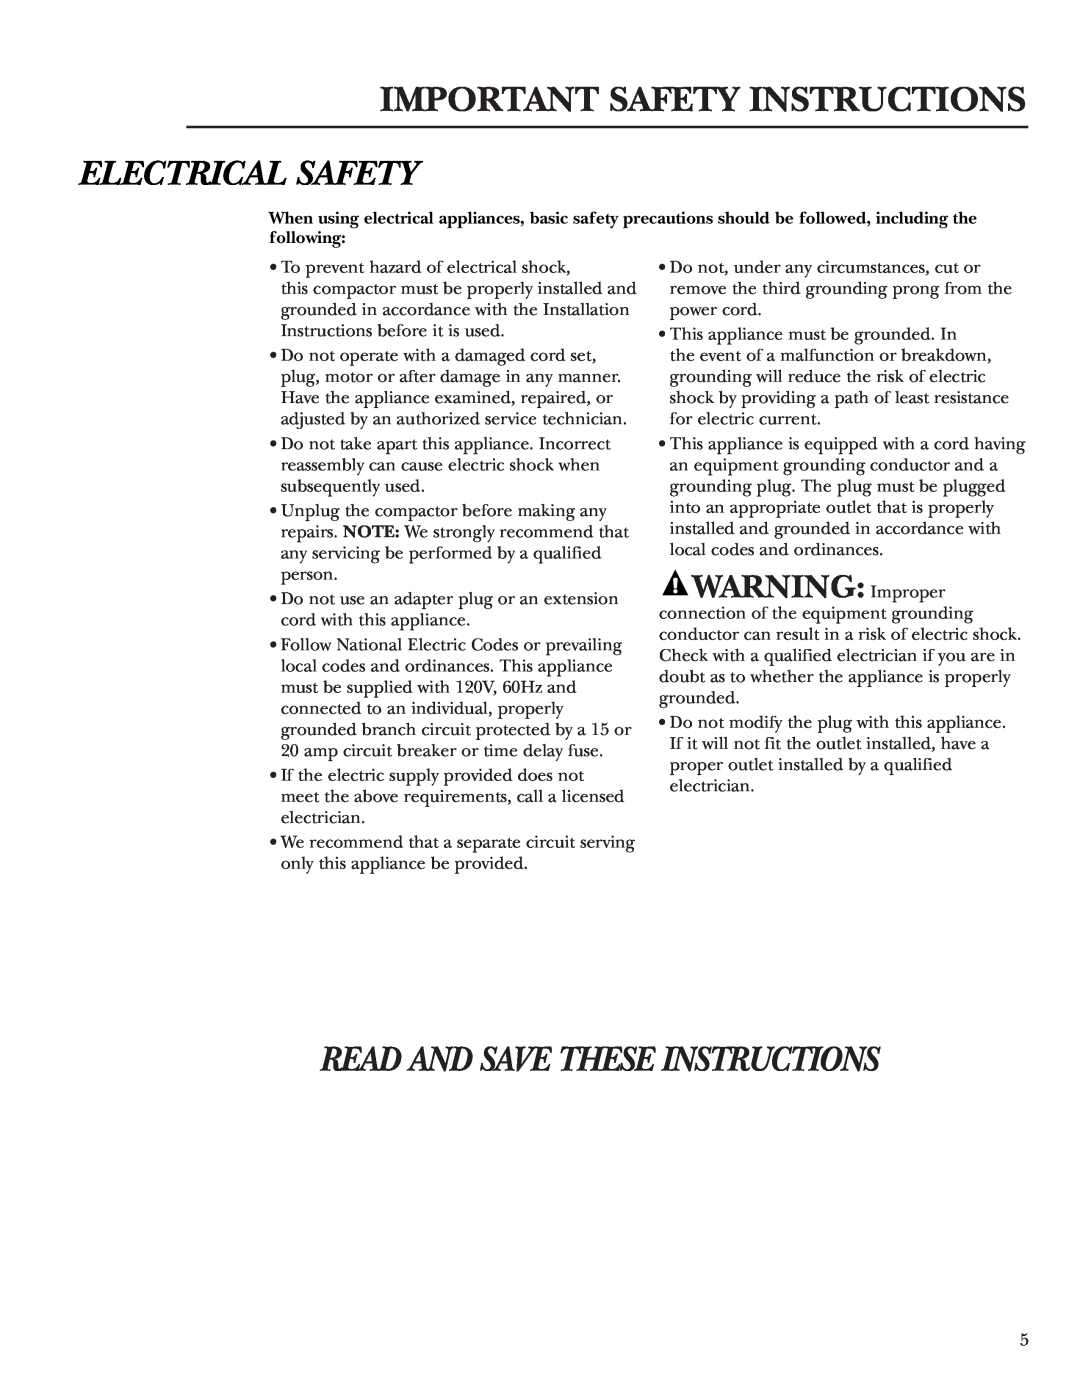 GE Monogram ZCGS150 Important Safety Instructions, Electrical Safety, Read And Save These Instructions, WARNING Improper 